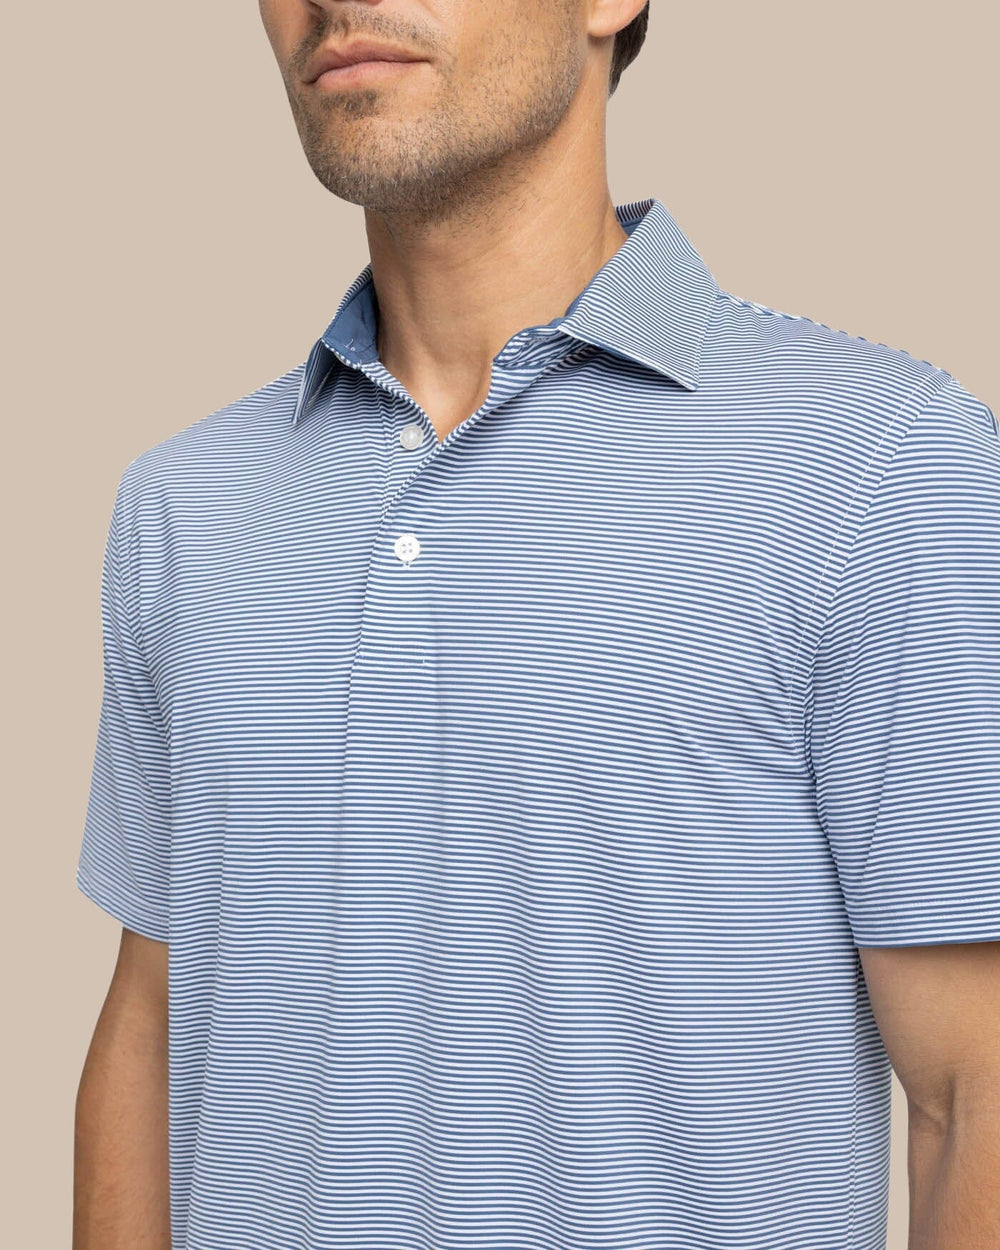 The detail view of the Southern Tide brrr-eeze Meadowbrook Stripe Polo by Southern Tide - Aged Denim